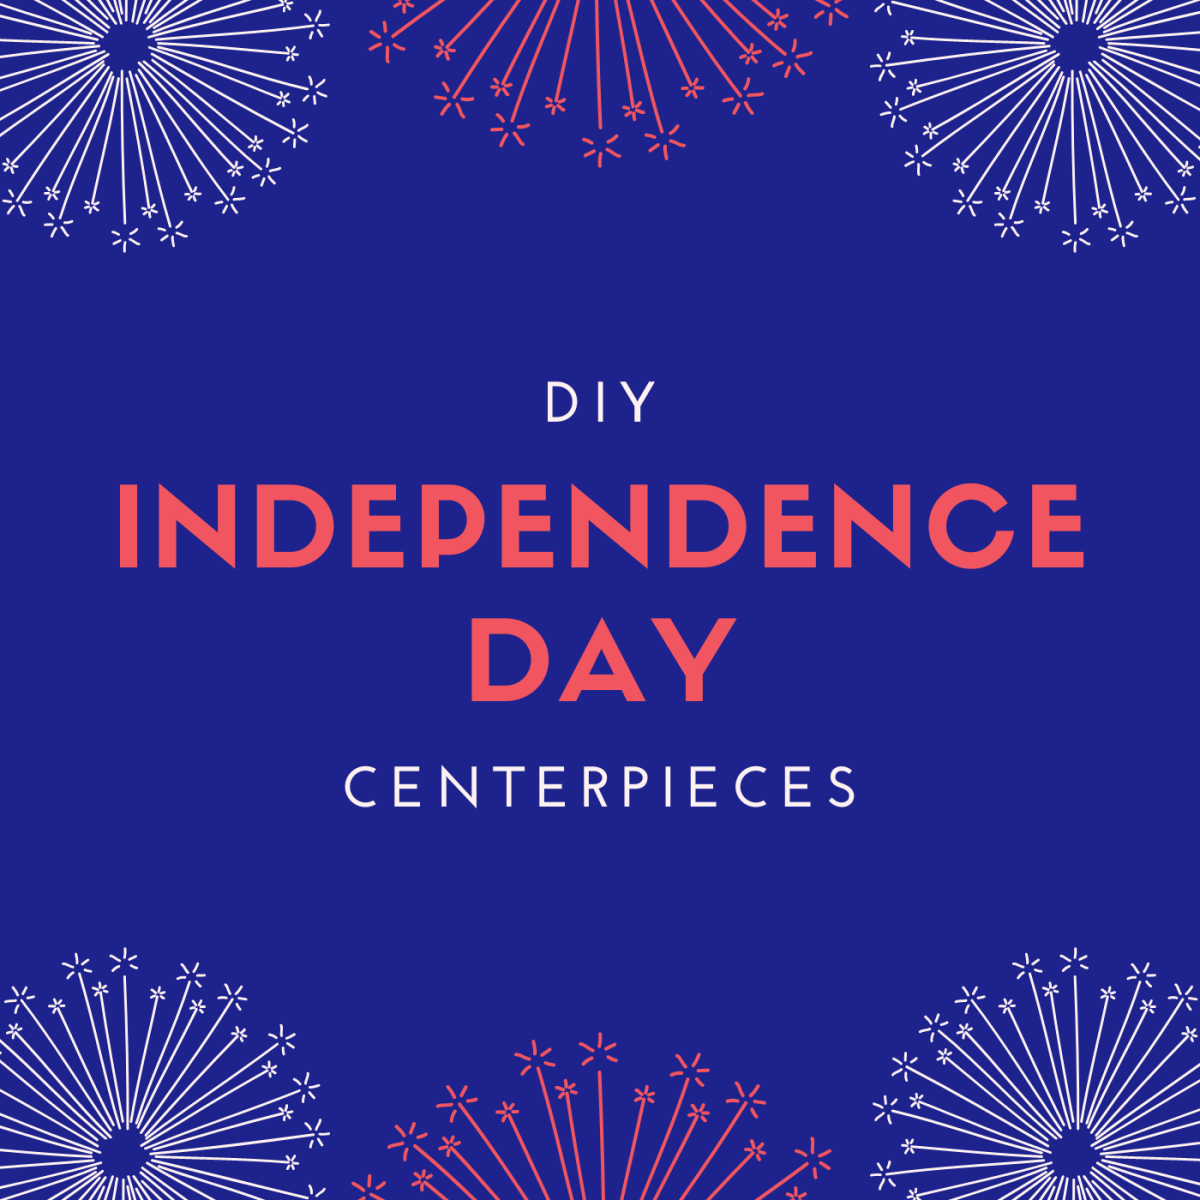 40+ Stunning Patriotic Centerpieces to DIY for the 4th of July